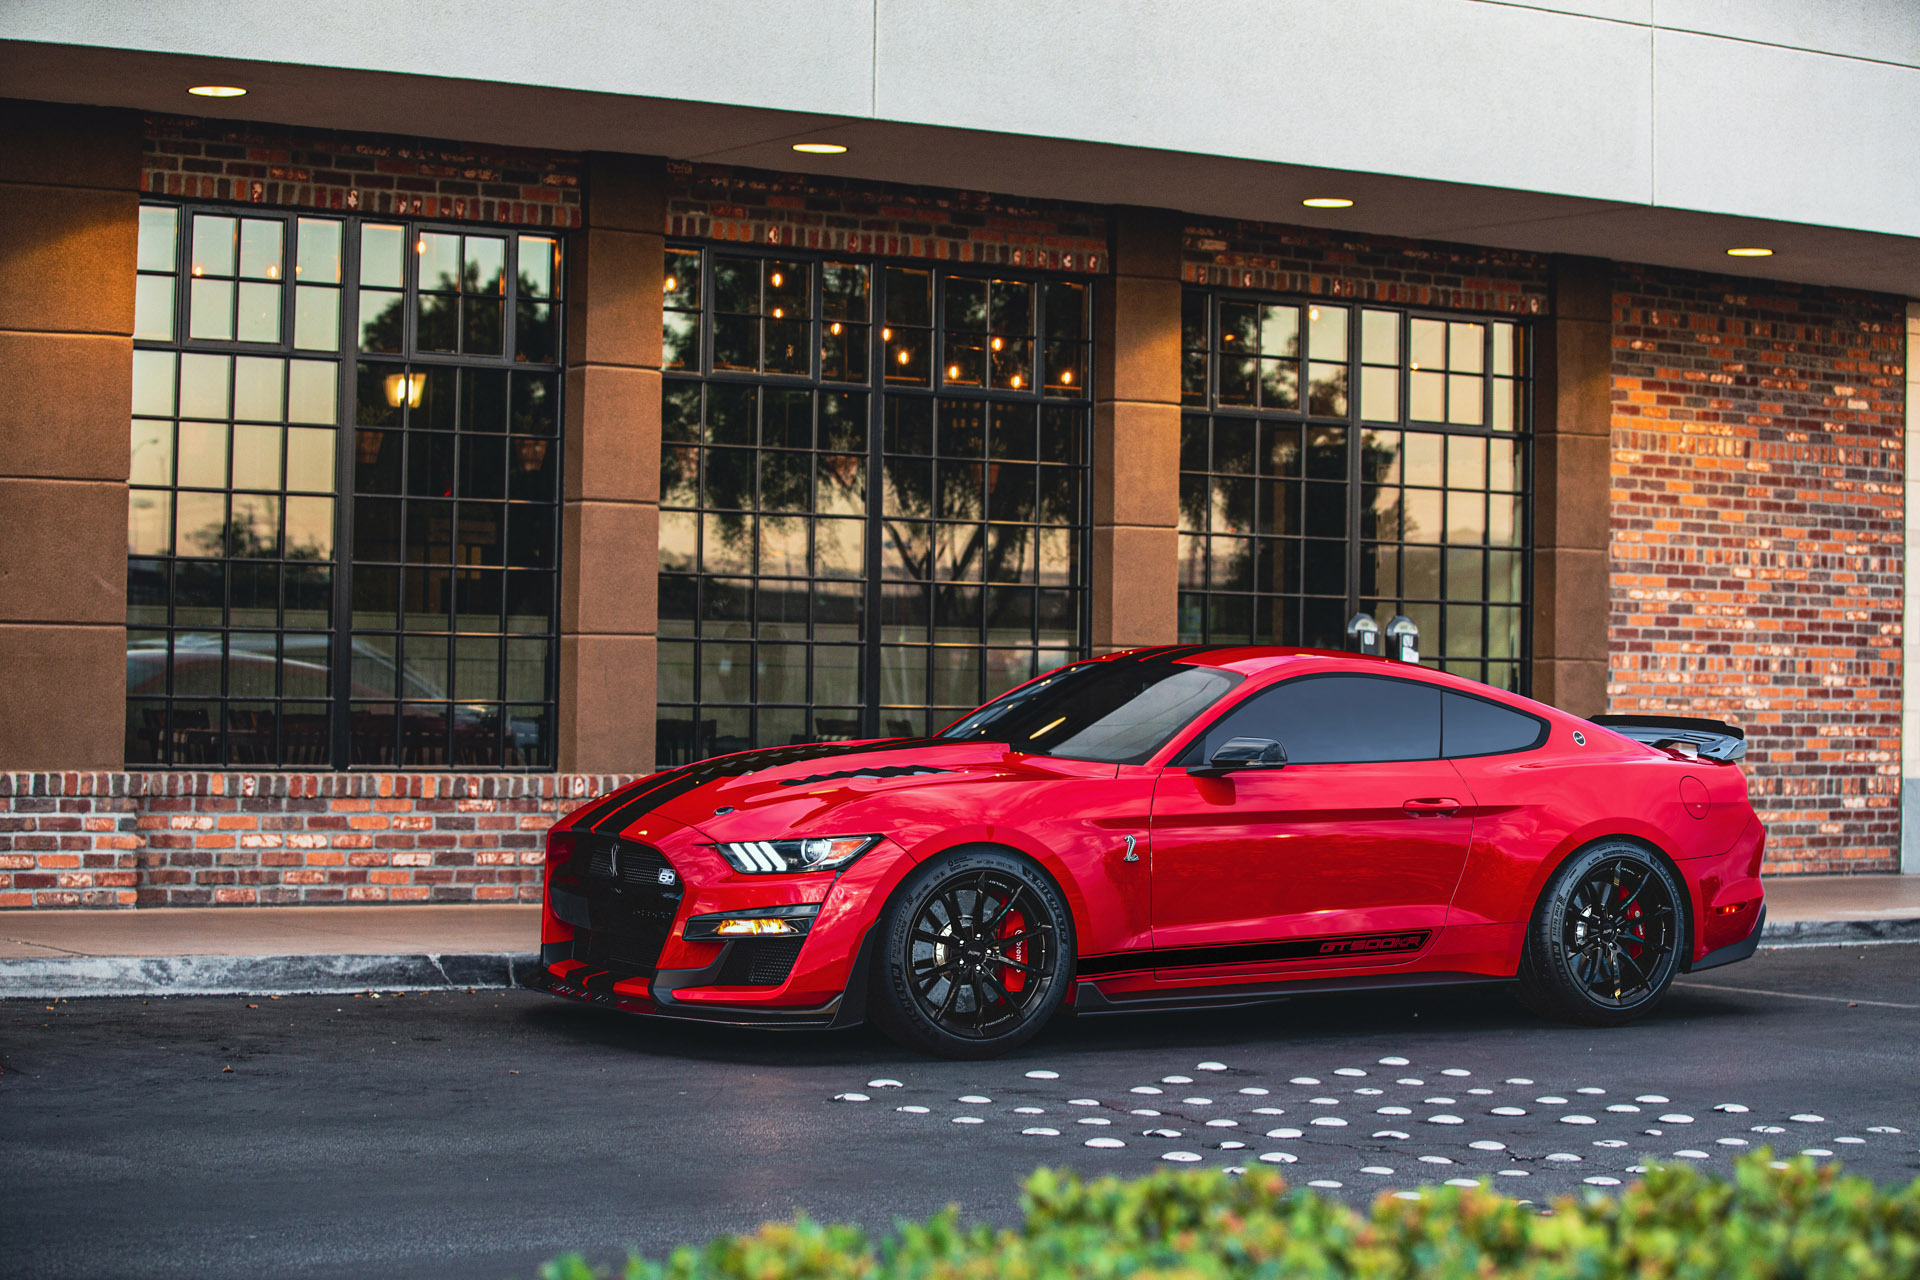 KR Comeback: Shelby Reintroduces GT500KR Mustang for Company’s 60th Anniversary